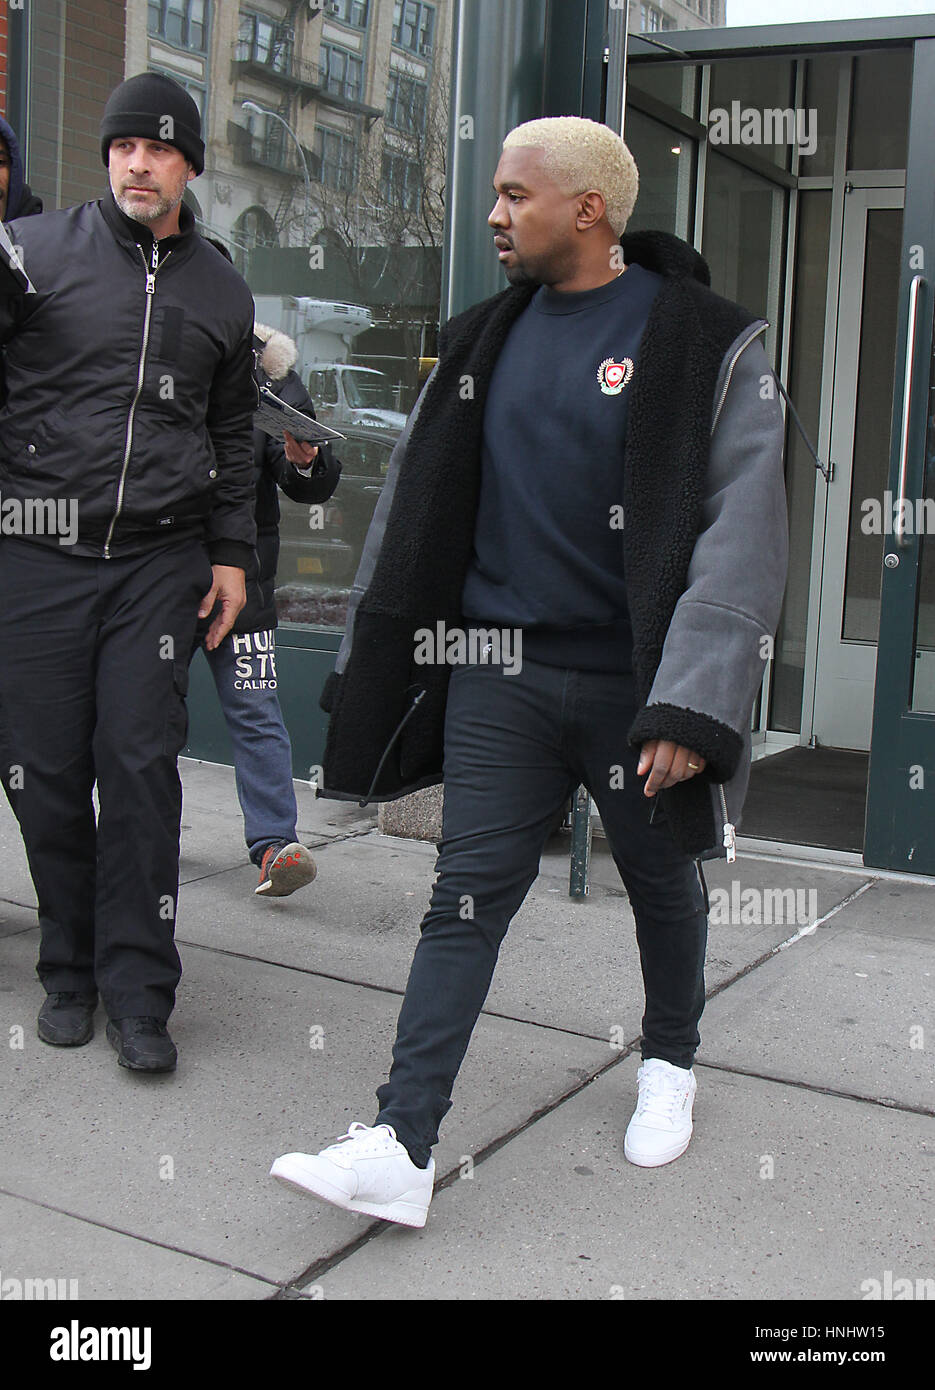 New York, NY, USA. 13th Feb, 2017. Kanye West seen leaving his hotel while  in town for Fashion Week in New York City on February 13, 2017. Credit:  Rw/Media Punch/Alamy Live News